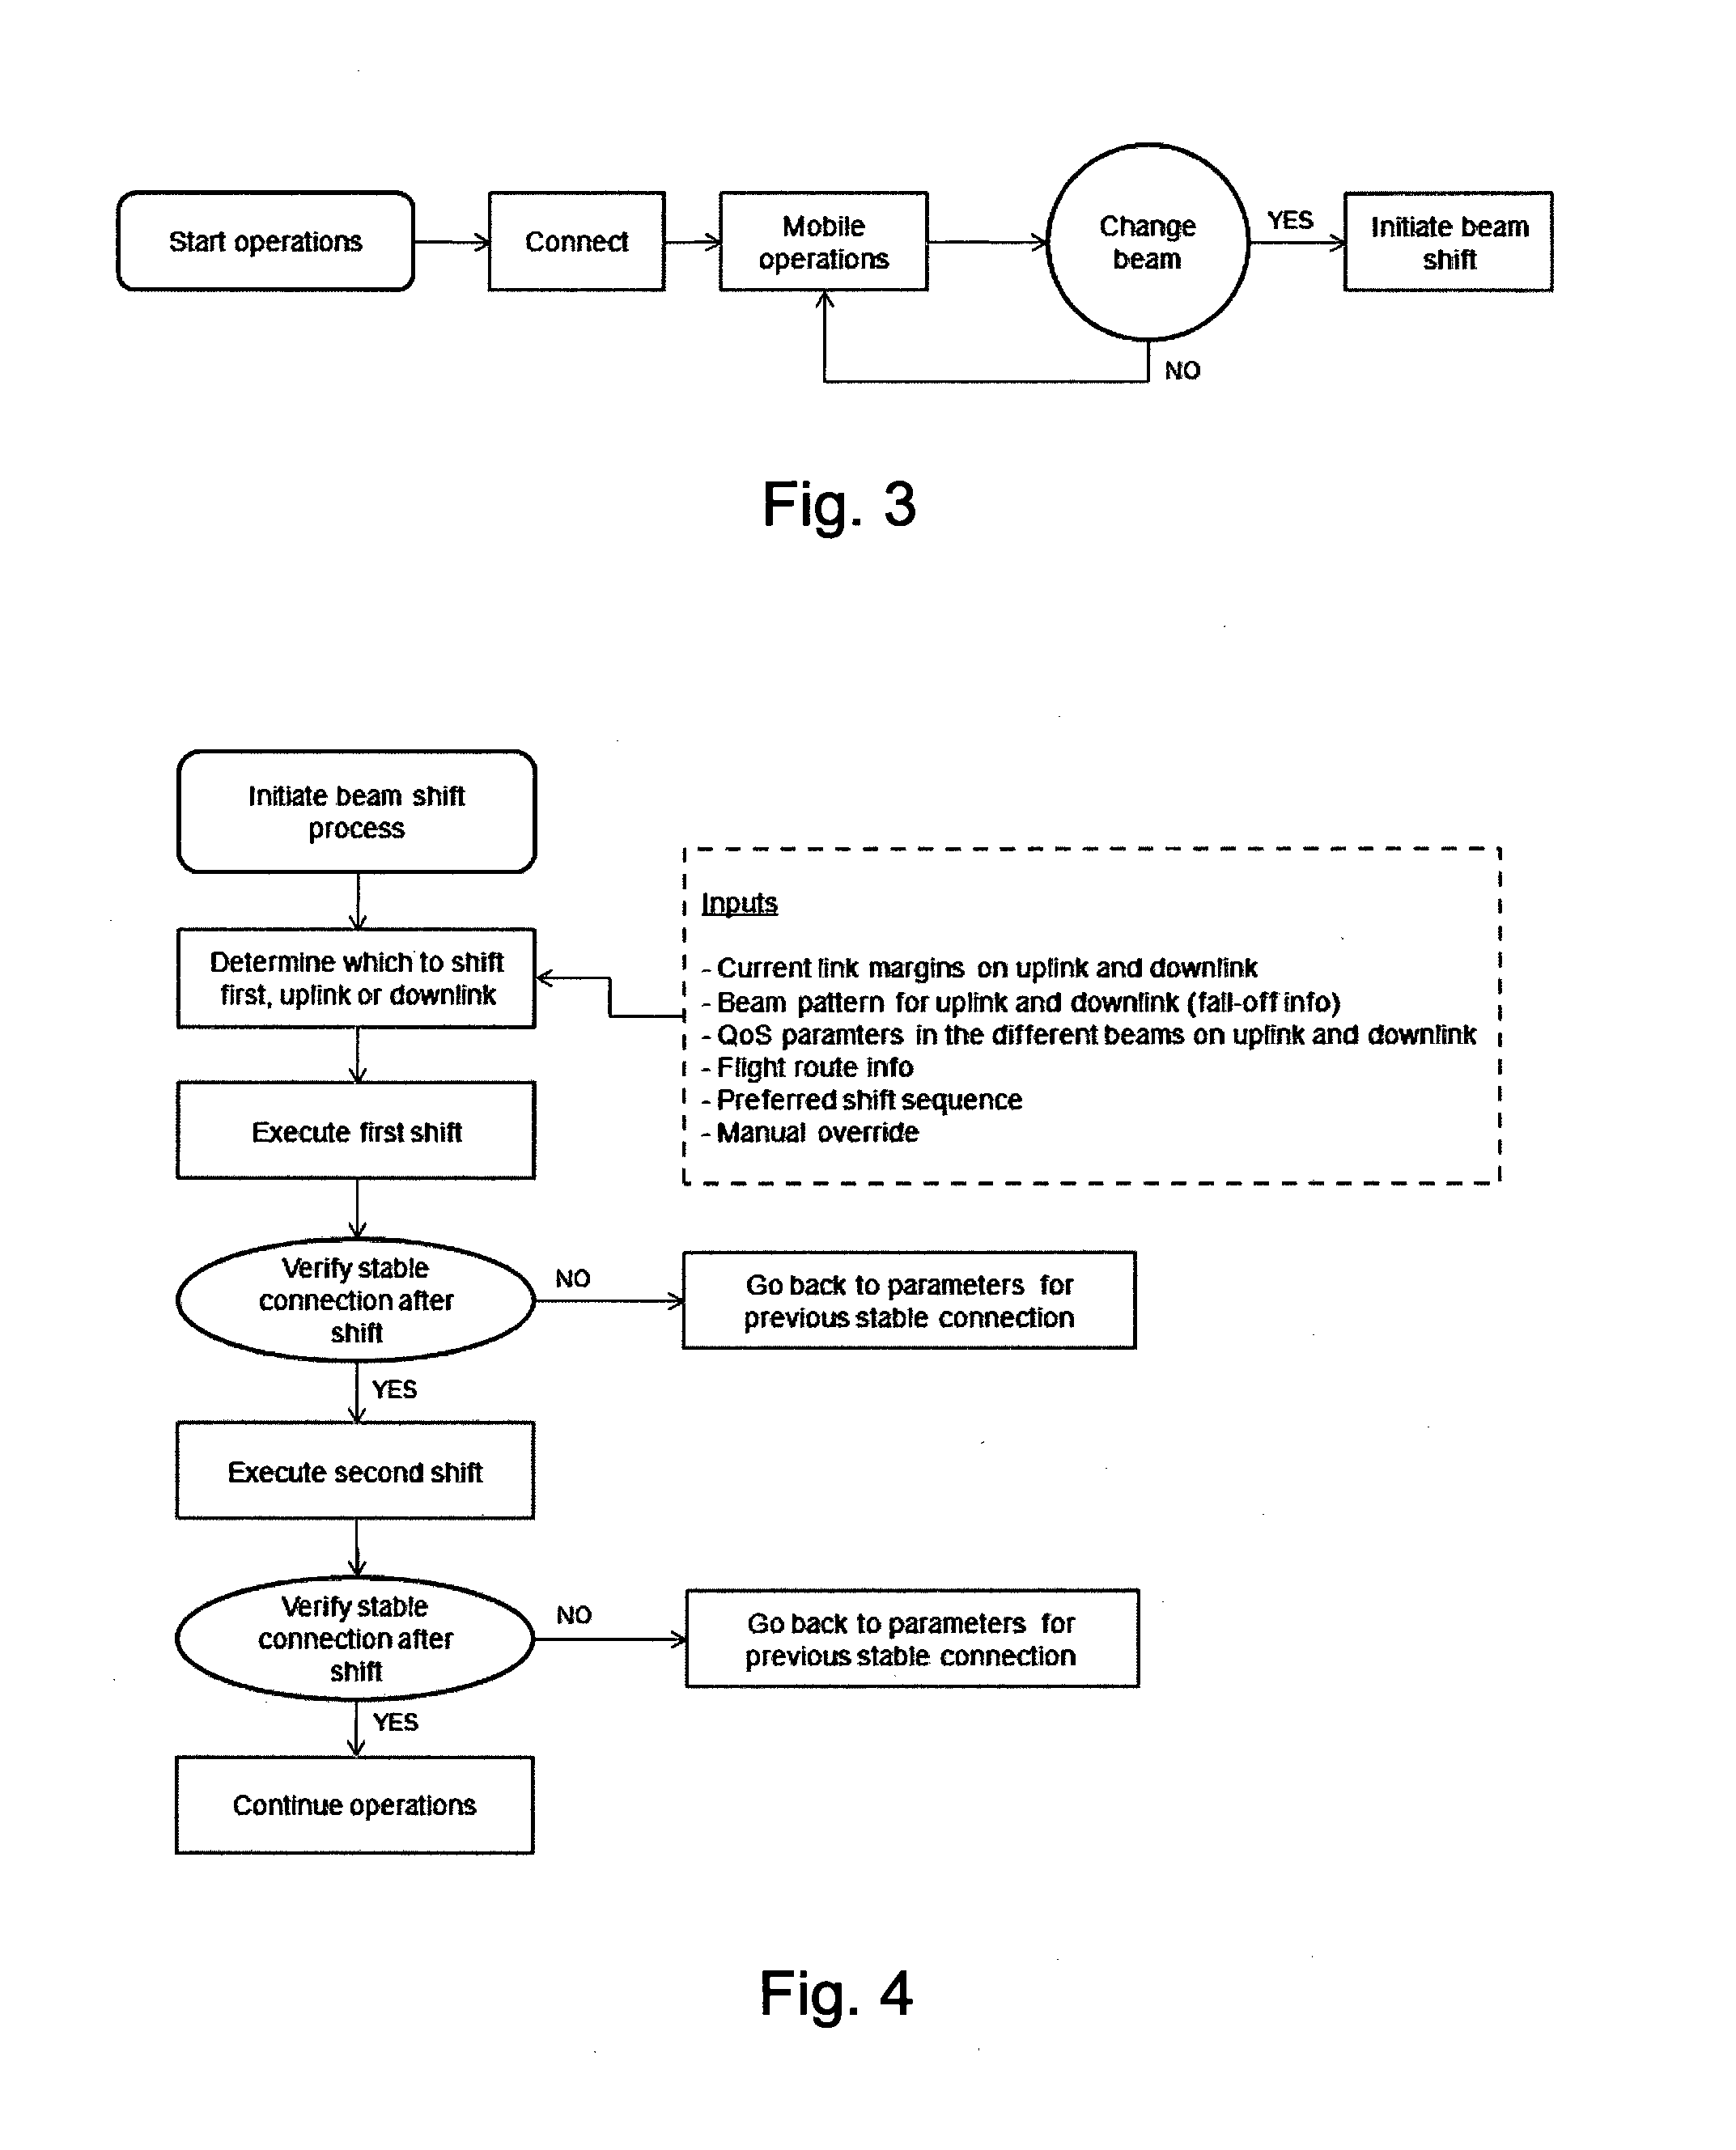 Method for Shifting Communications of a Terminal Located on a Moving Platform from a First to a Second Satellite Antenna Beam